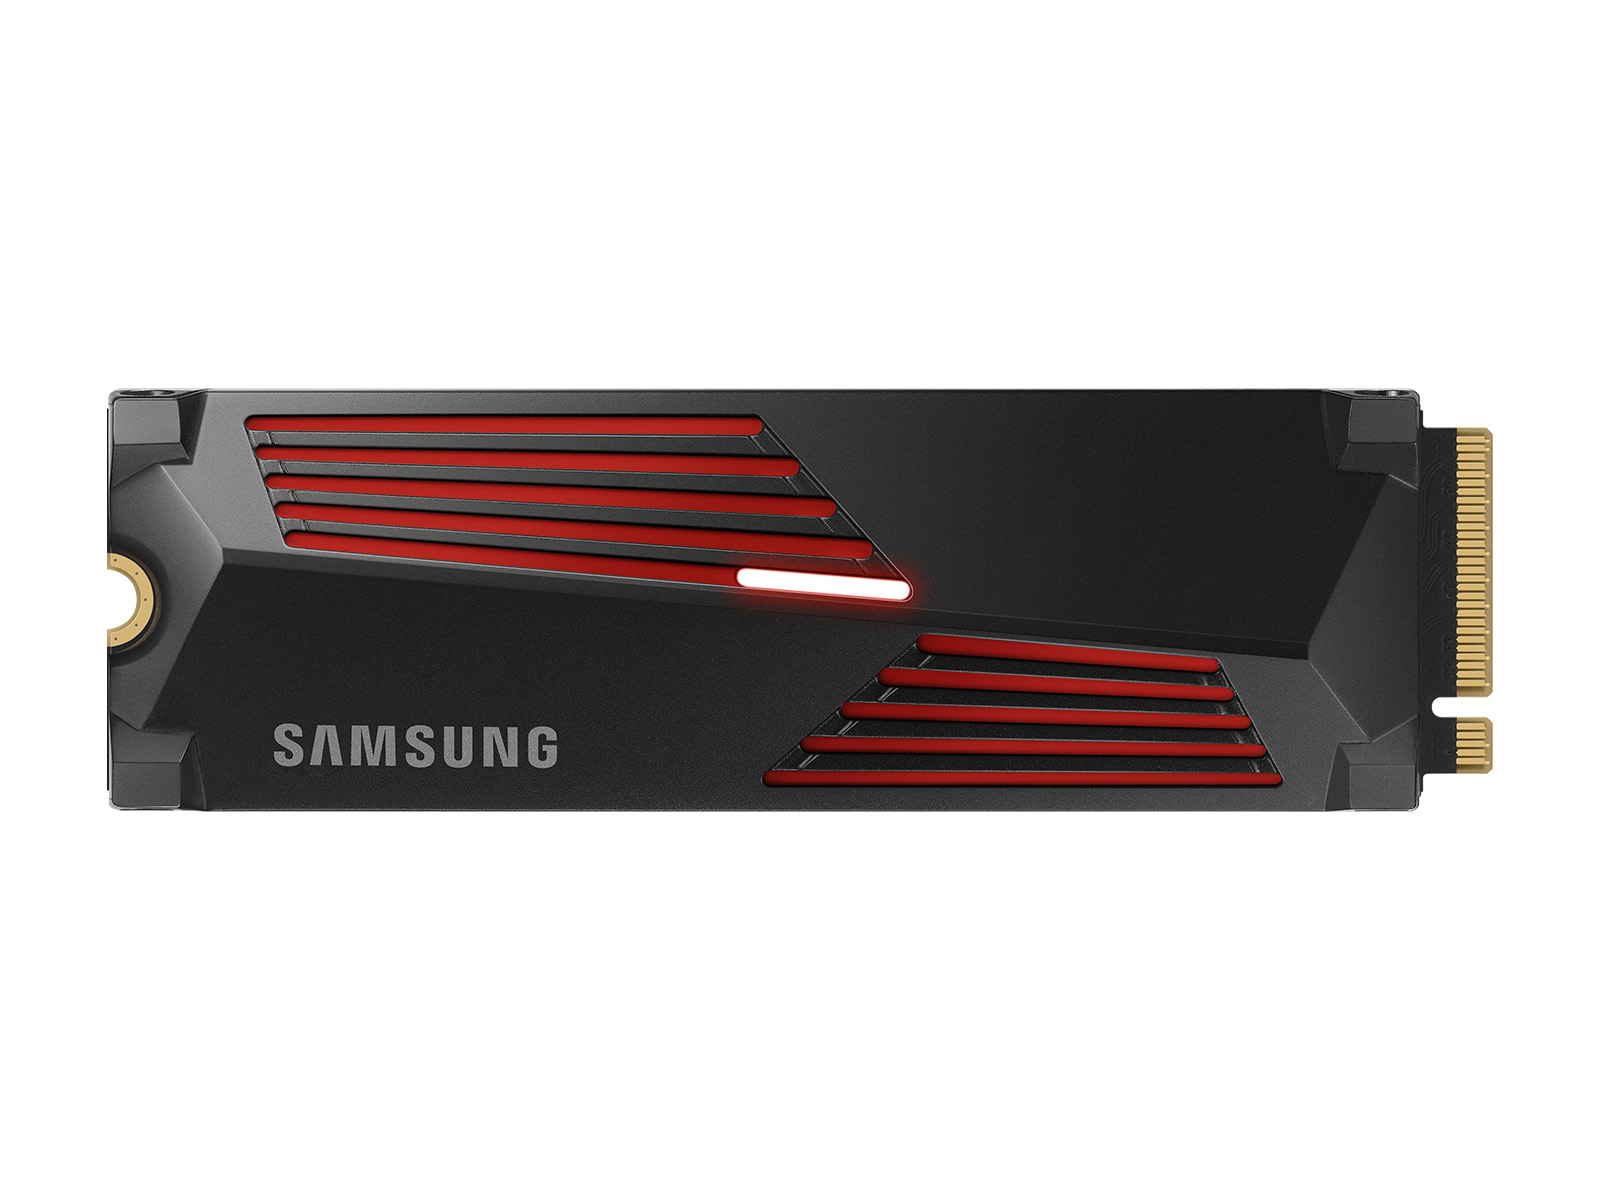 Samsung SSD 980 Pro With Heatsink PCIe 4.0 NVMe 1TB Review 